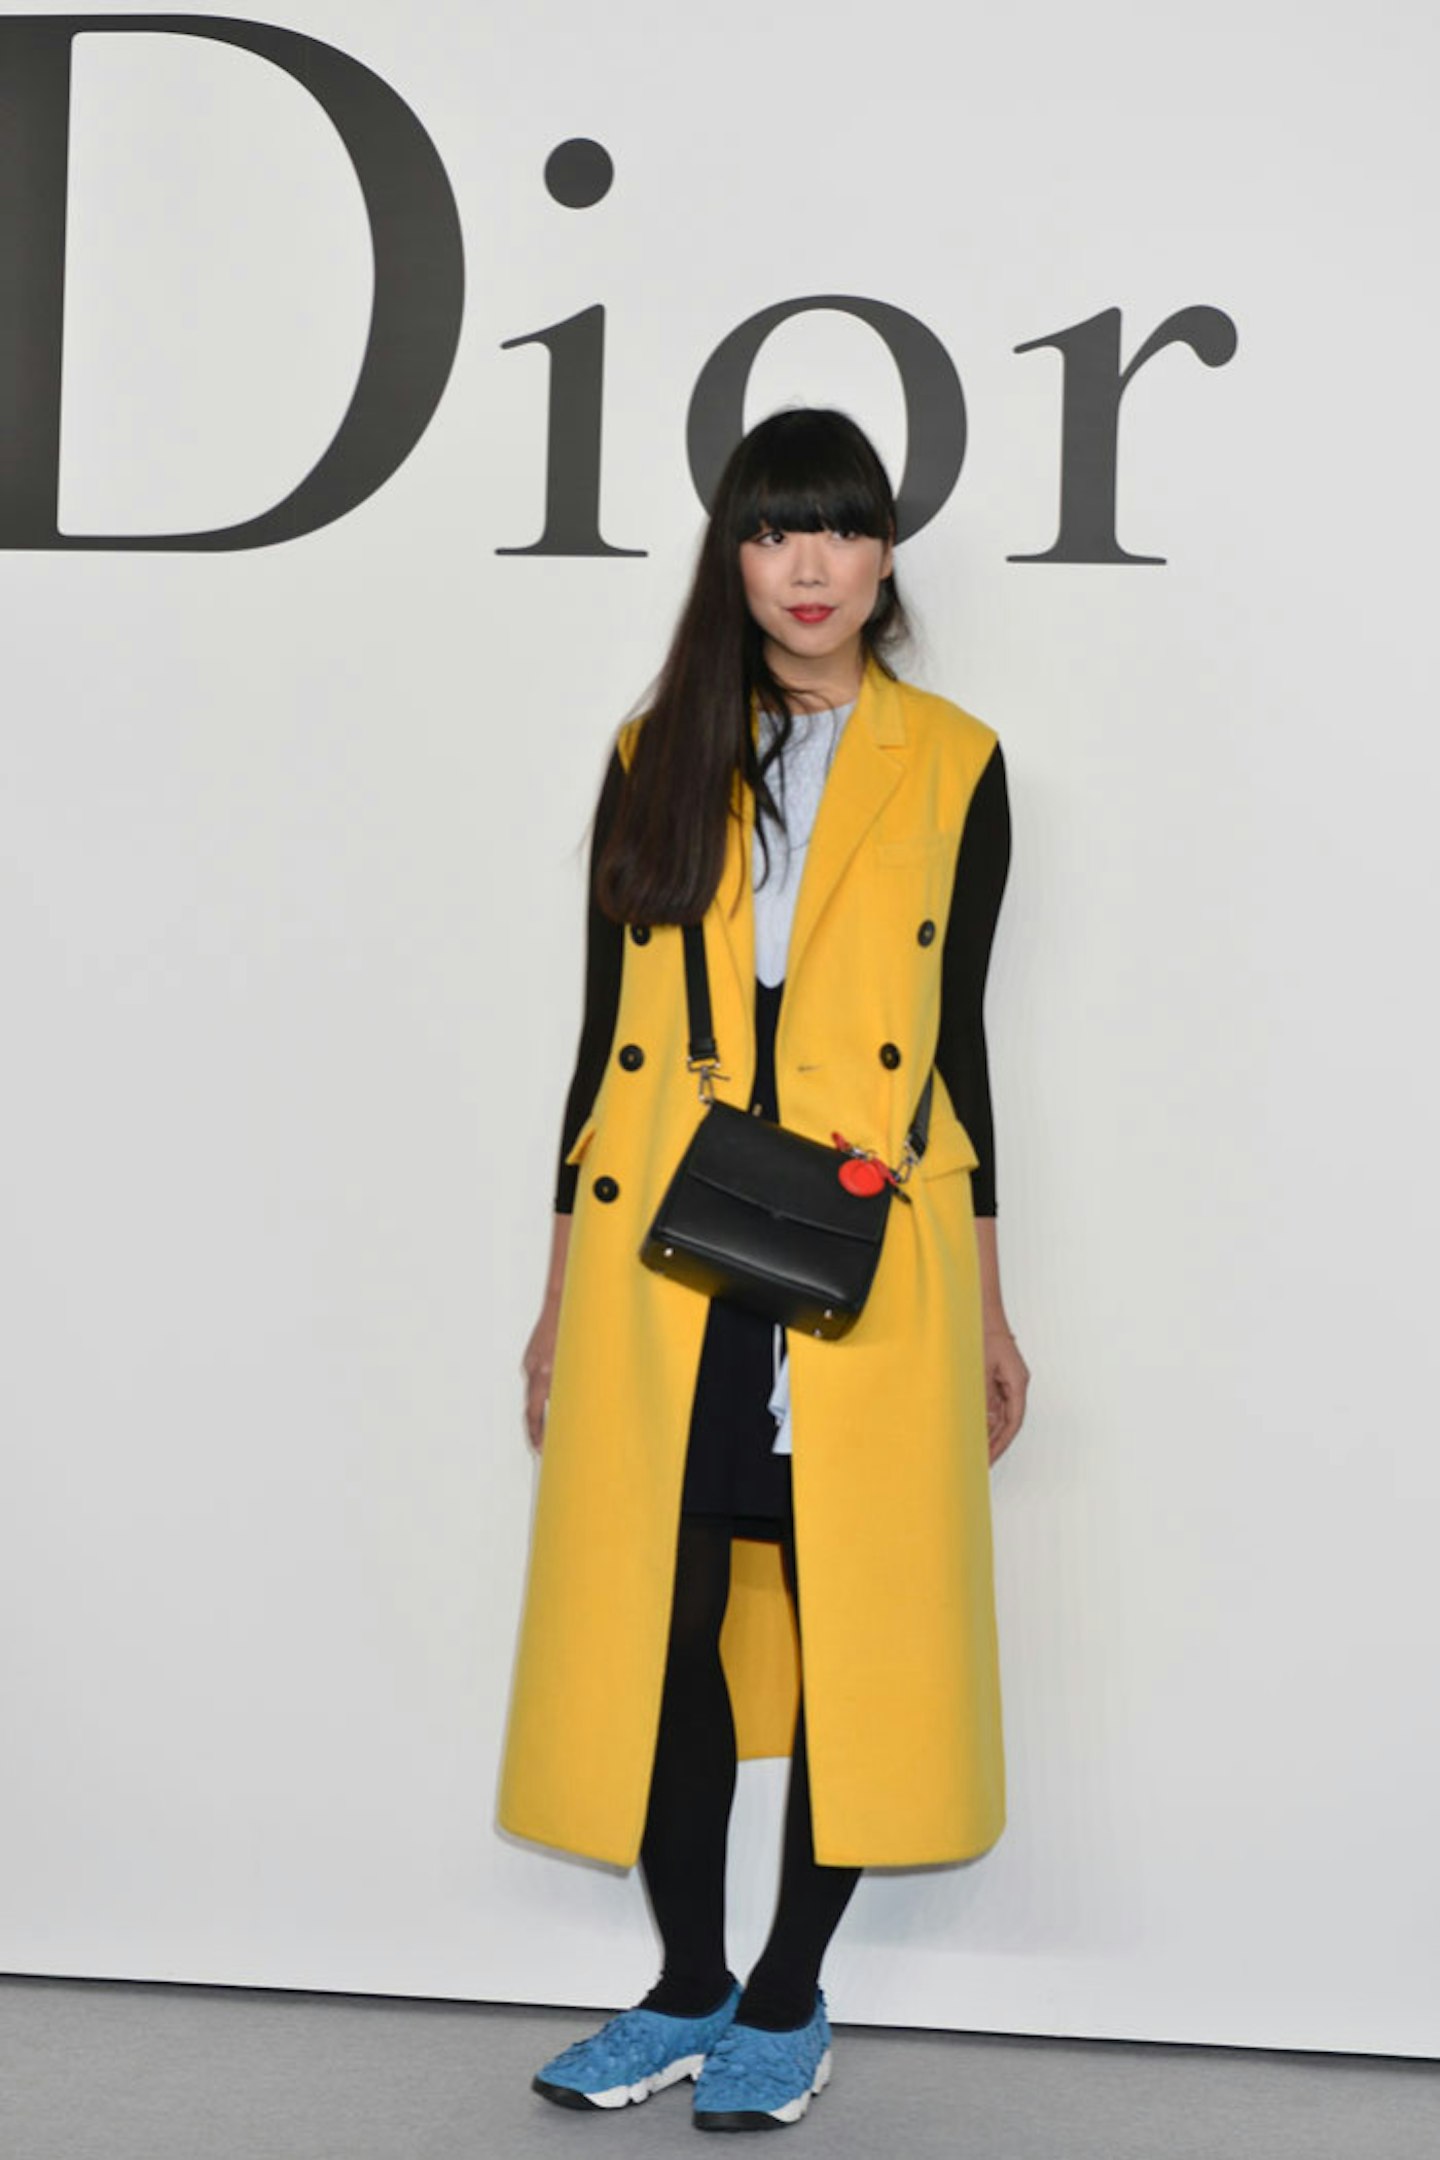 GALLERY >> Scroll through for Dior's fancy FROW girls >>